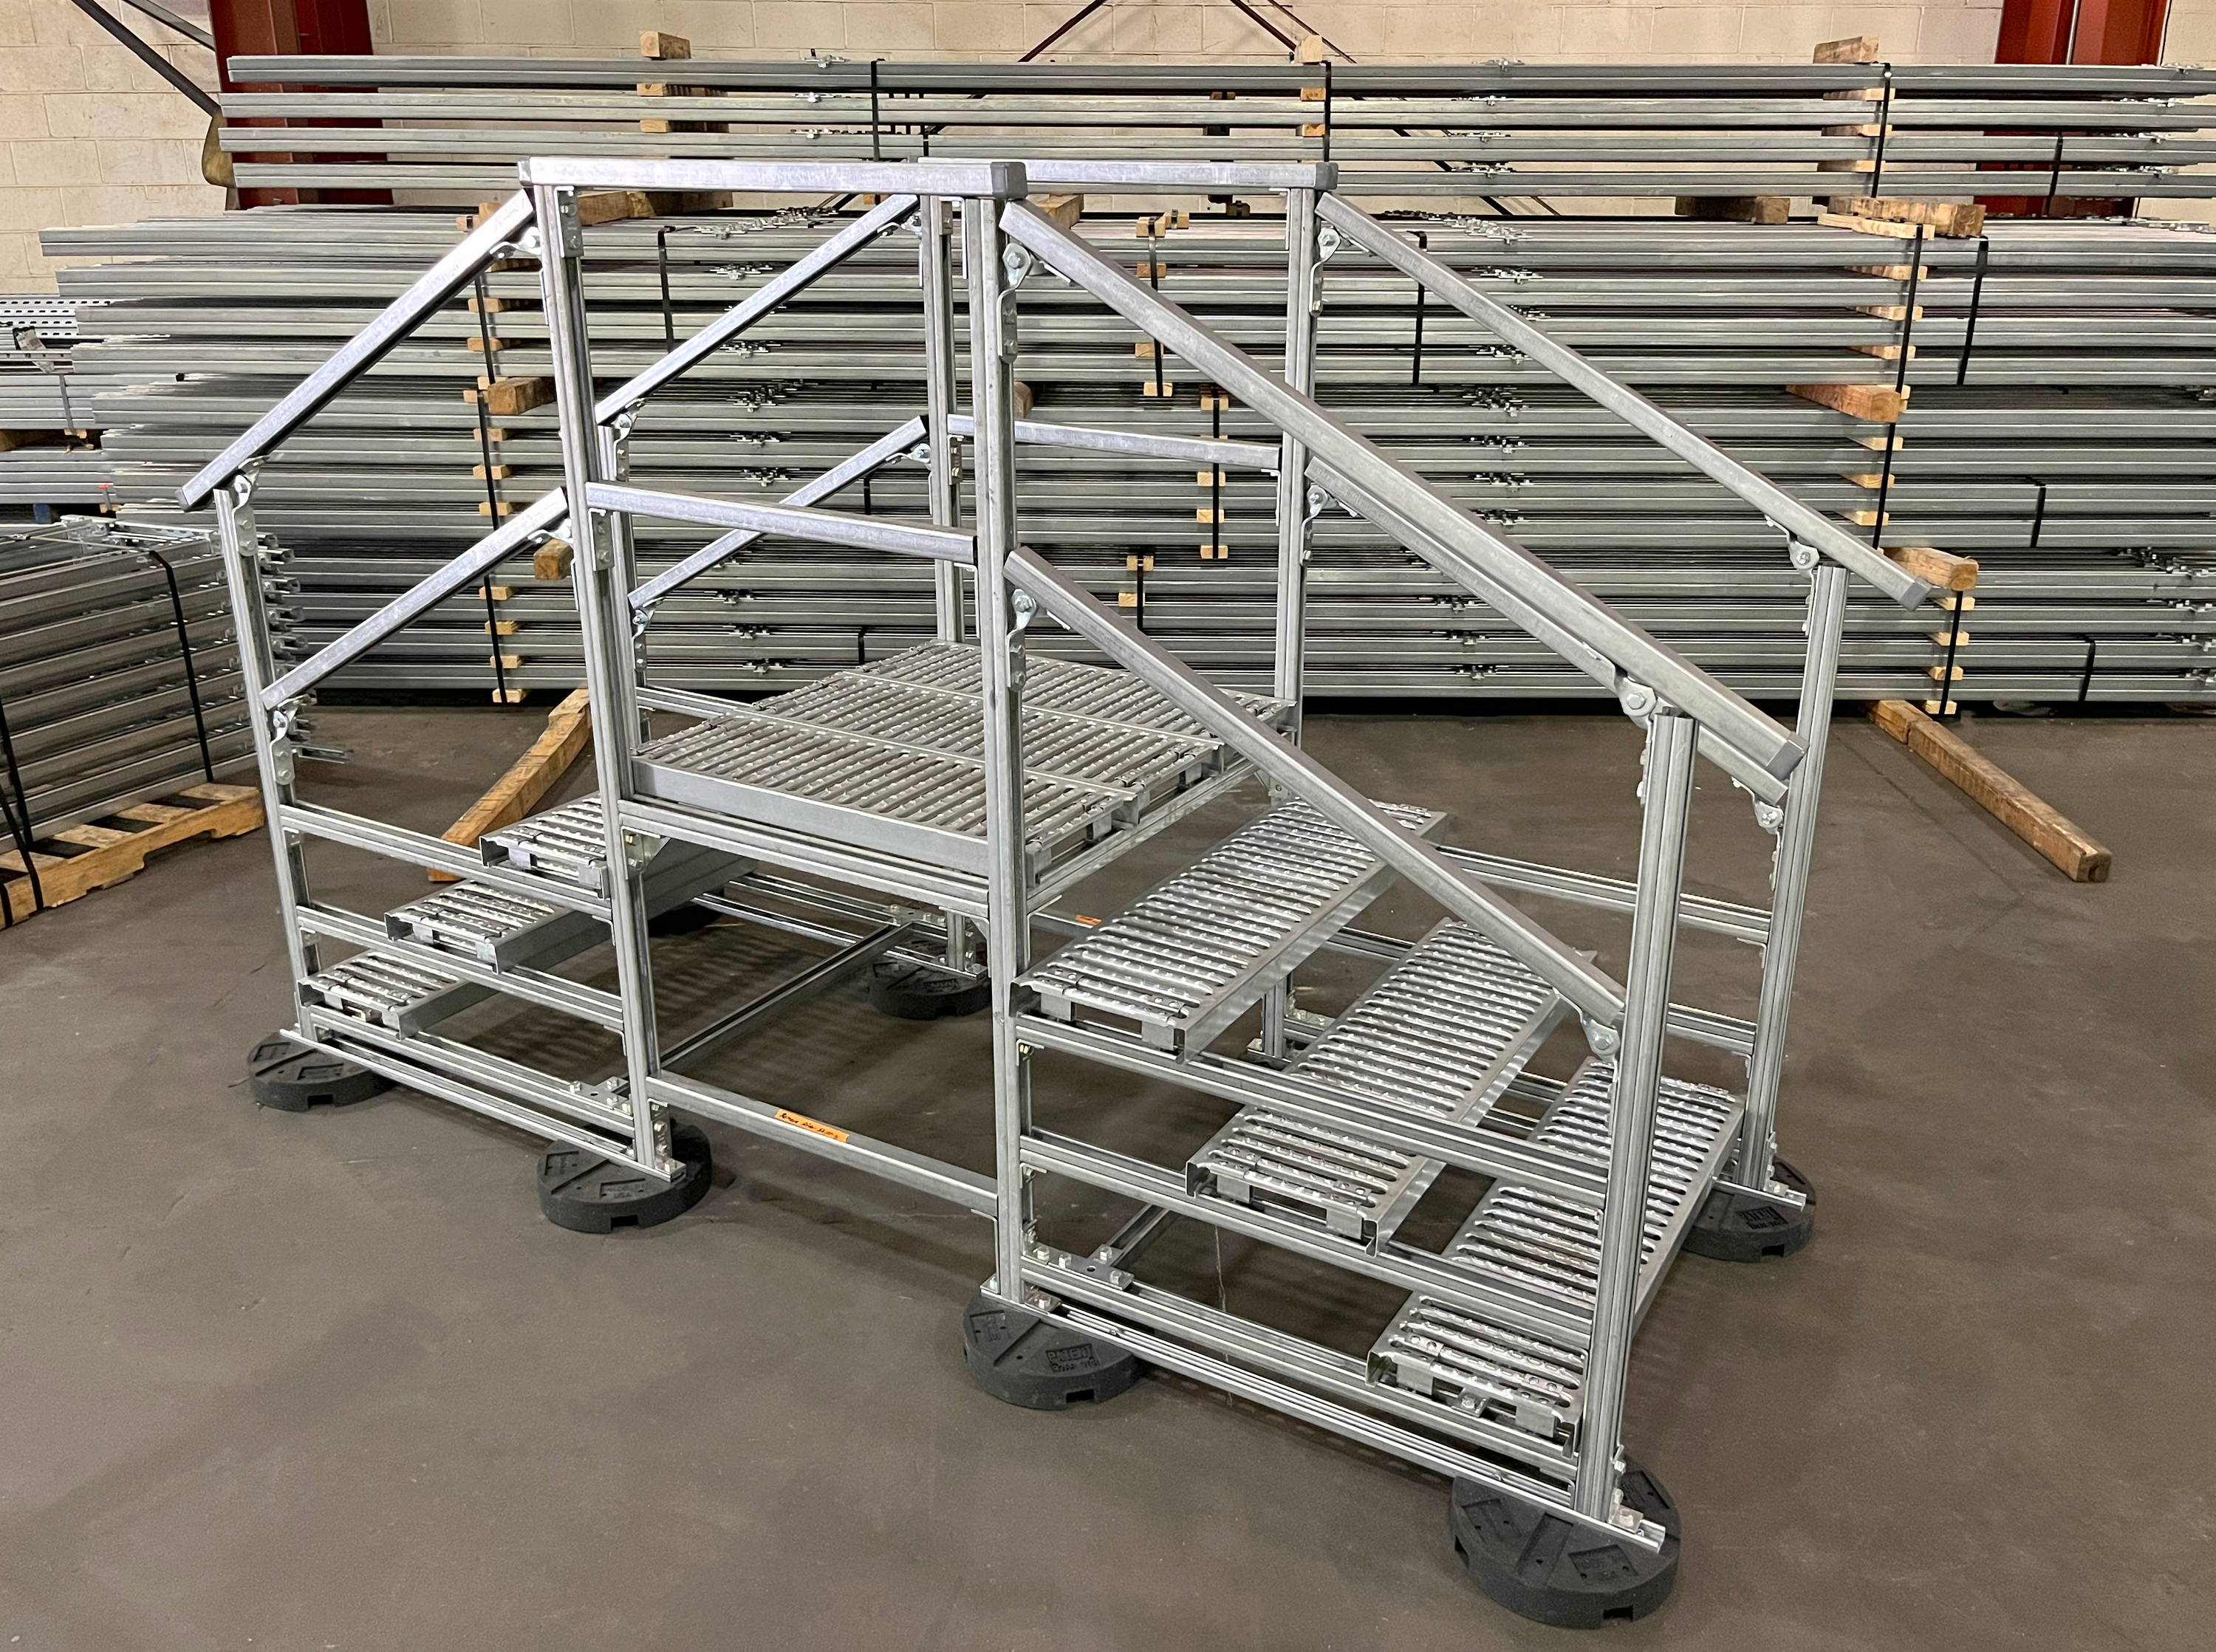 Prefabricated Unistrut rooftop crossovers are built and ready to be installed quickly on rooftops, without drilling or penetrating the rooftop membrane thanks to Unipier bases.